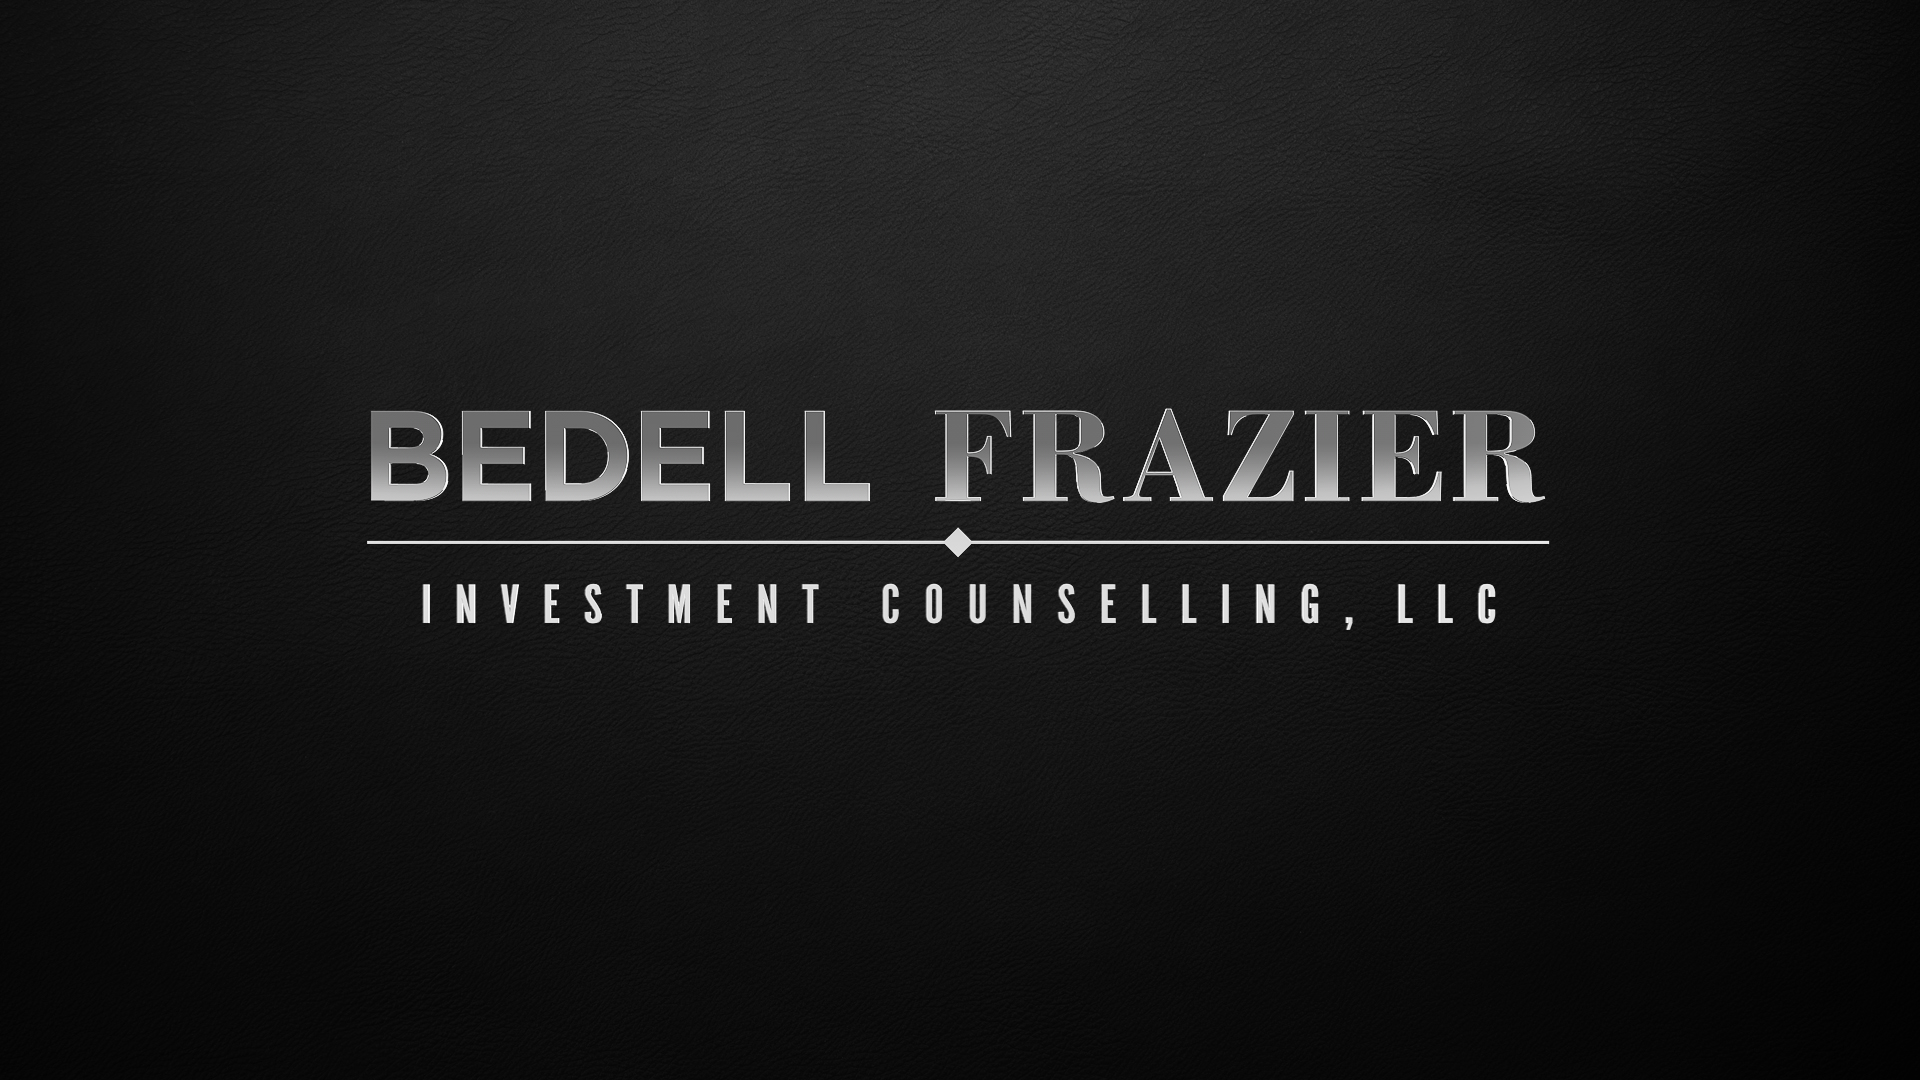 Bedell Frazier Investment Counselling